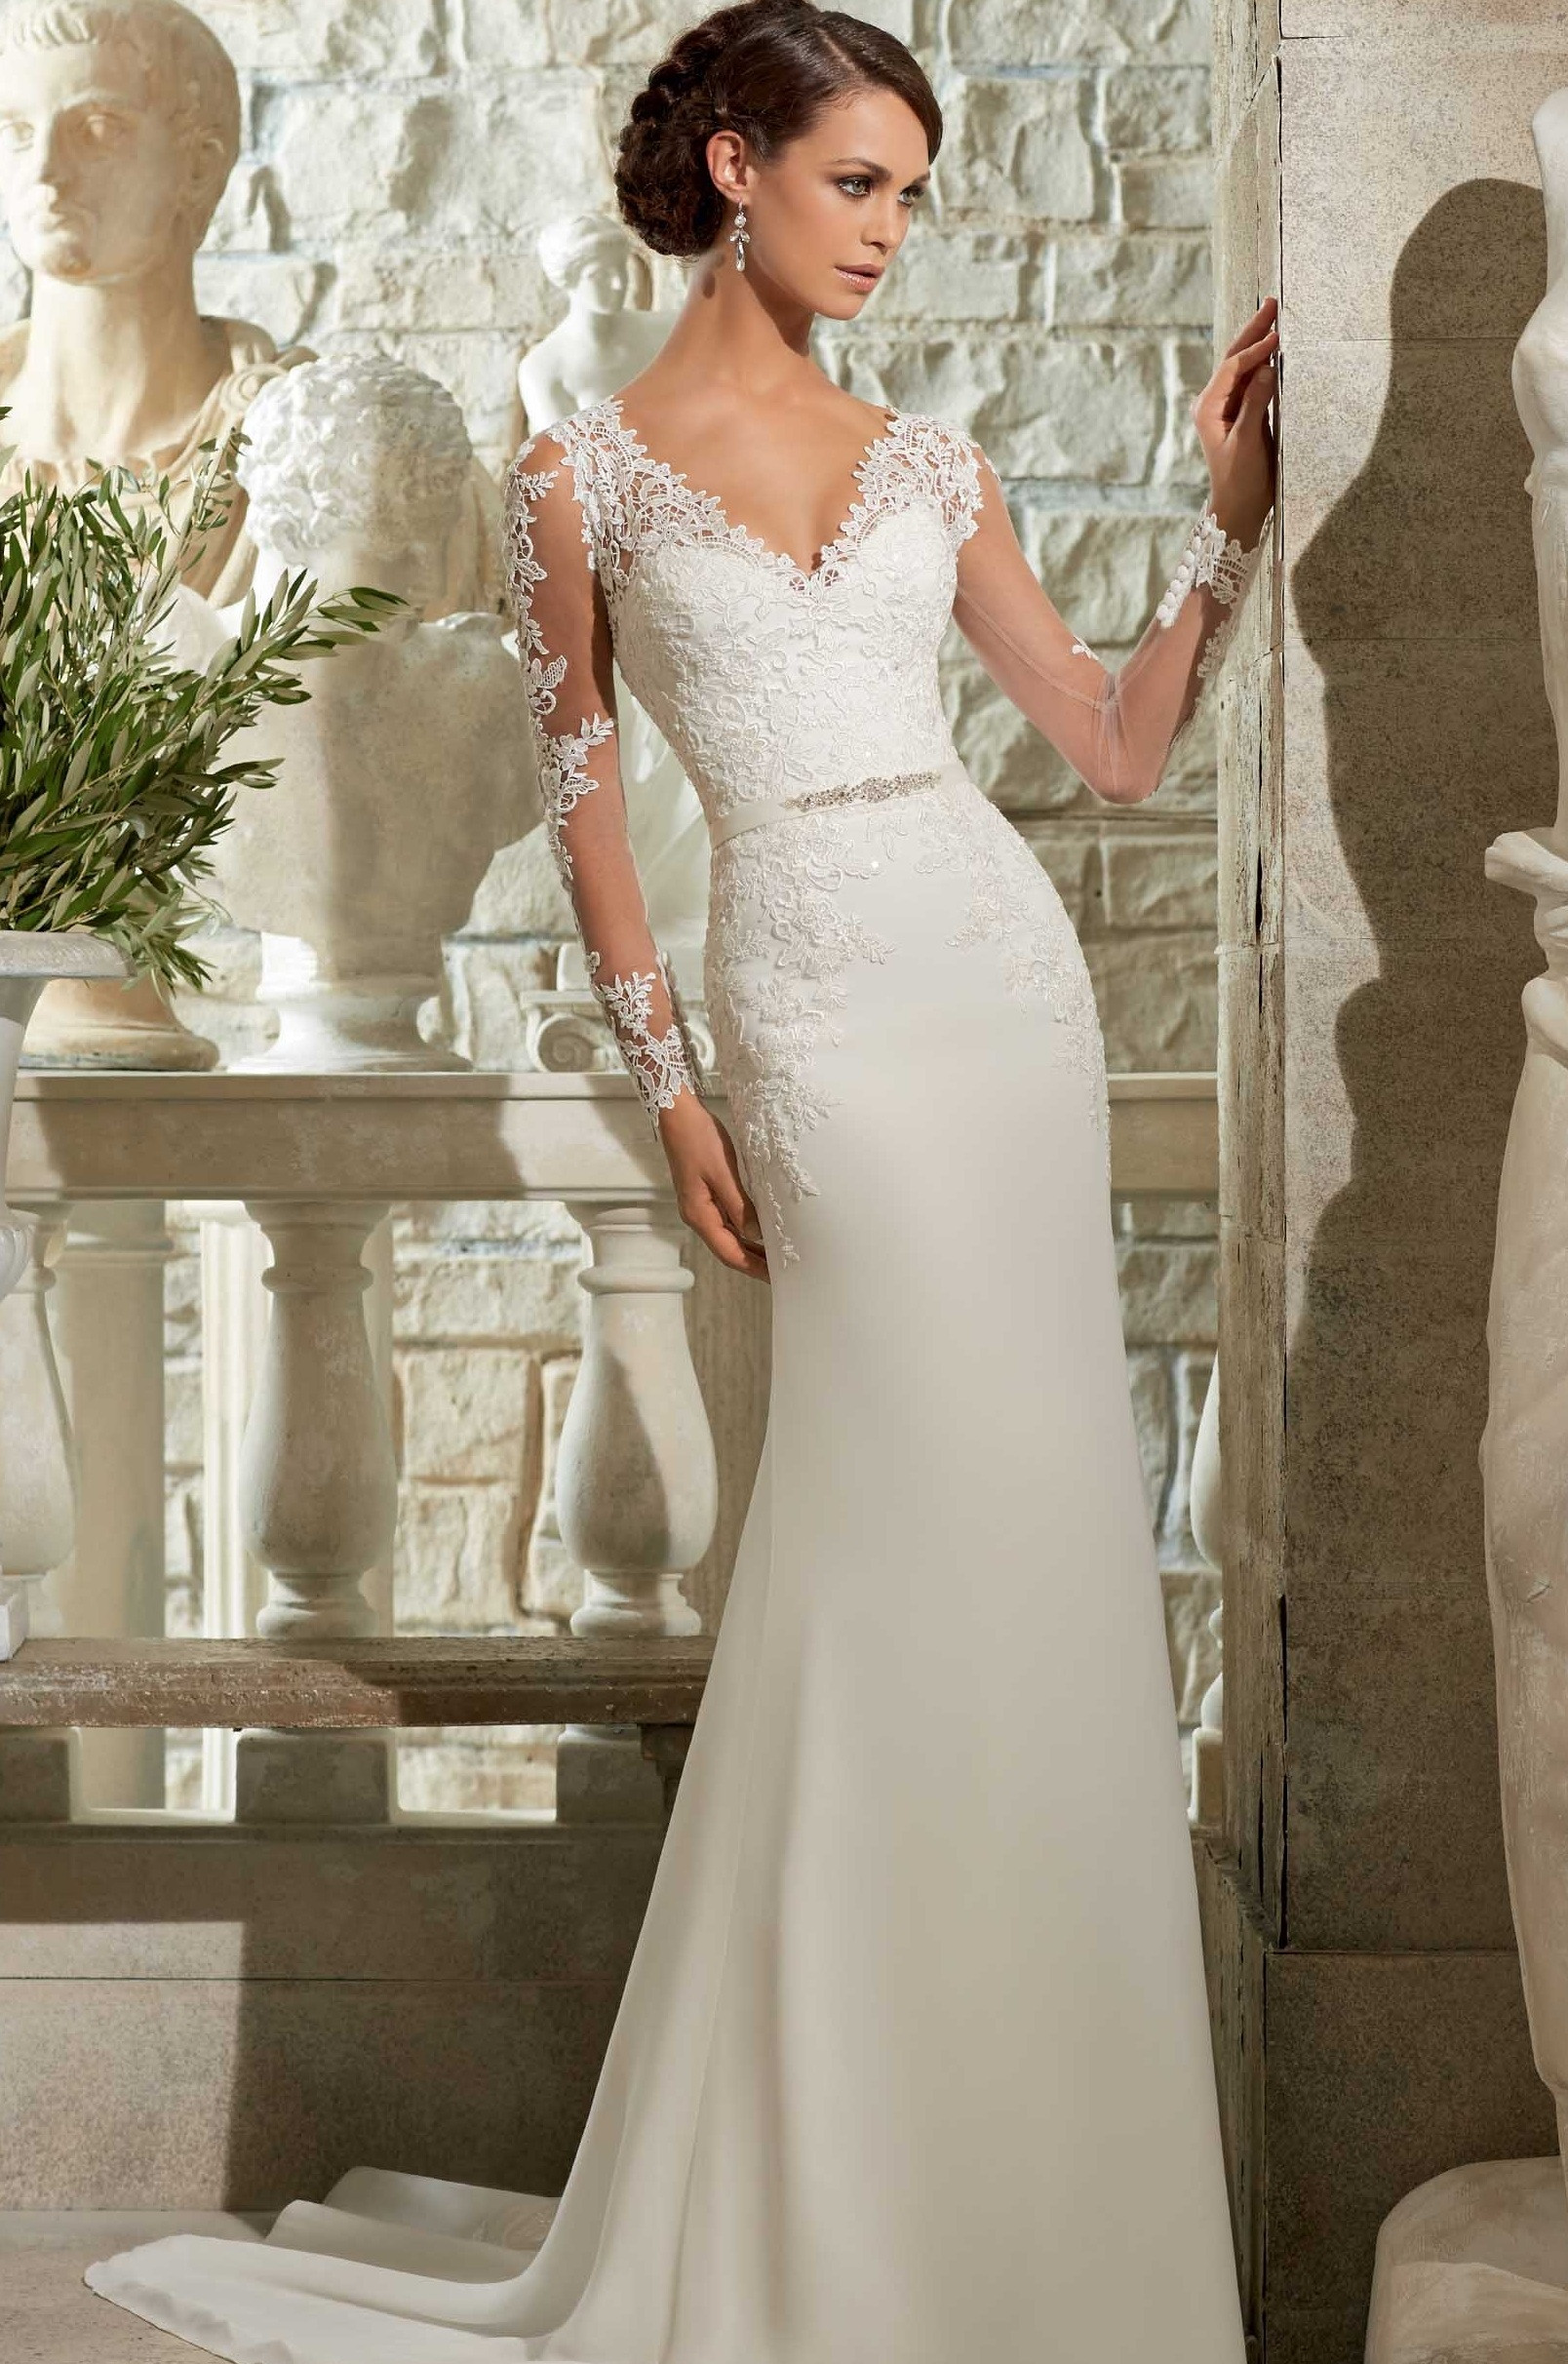 V Neck Wedding Dress
 9 Types of Necklines Which Look the Best with Long Sleeve